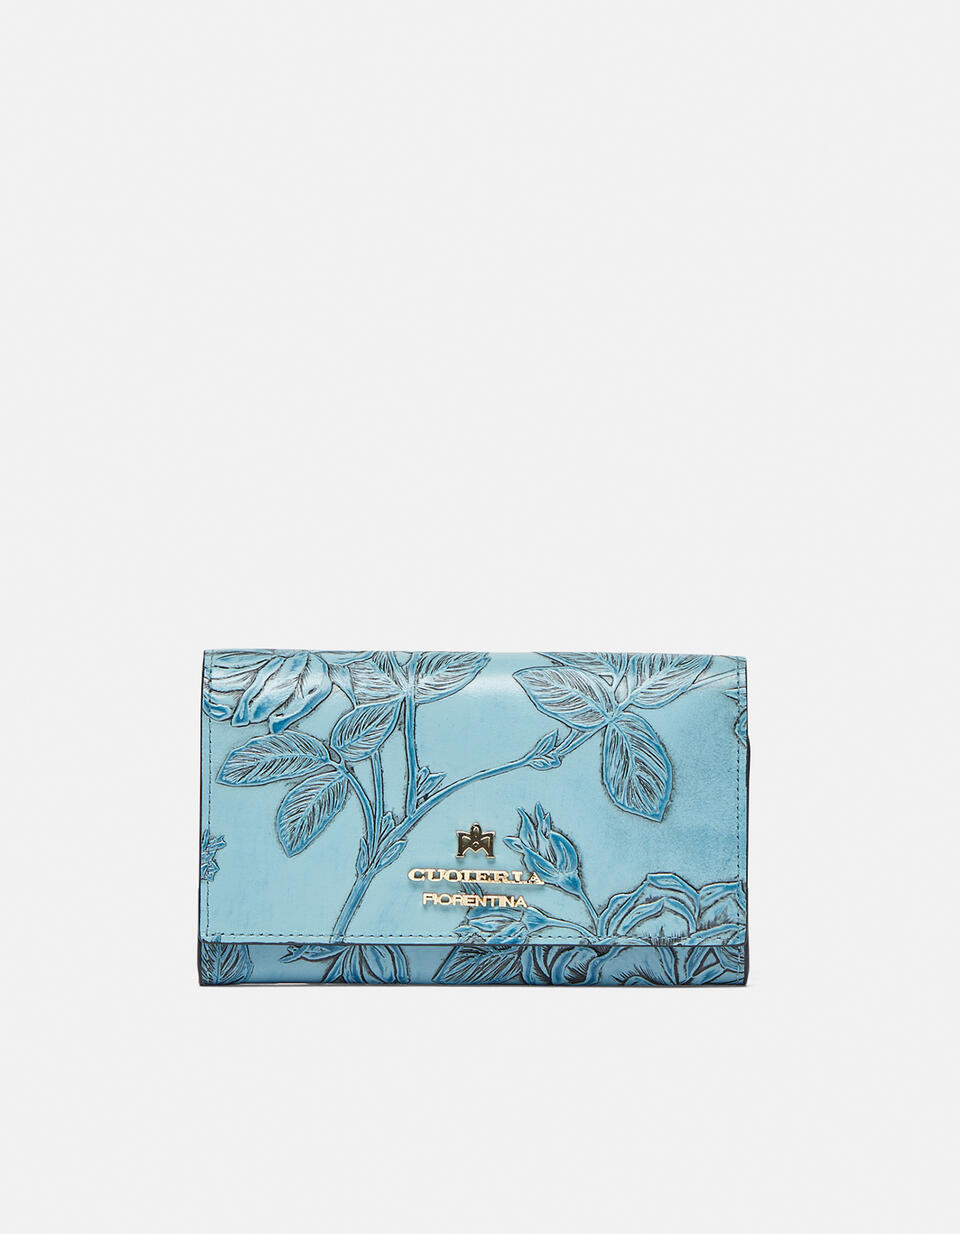 Accordian style calf leather wallet - Women's Wallets - Women's Wallets | Wallets Mimì CELESTE - Women's Wallets - Women's Wallets | WalletsCuoieria Fiorentina